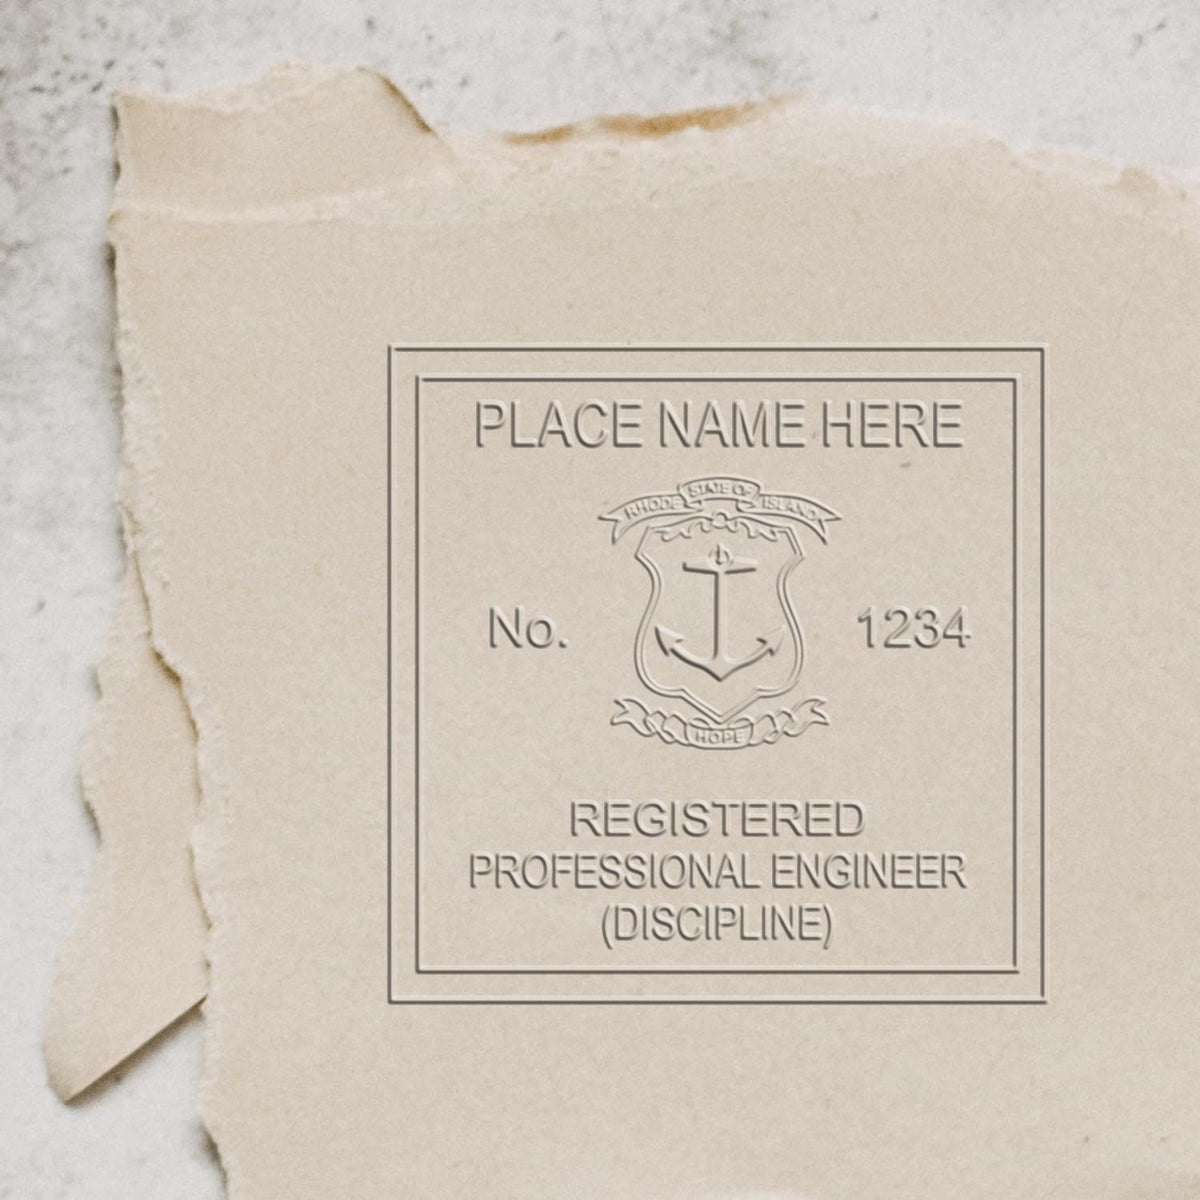 A photograph of the Soft Rhode Island Professional Engineer Seal stamp impression reveals a vivid, professional image of the on paper.